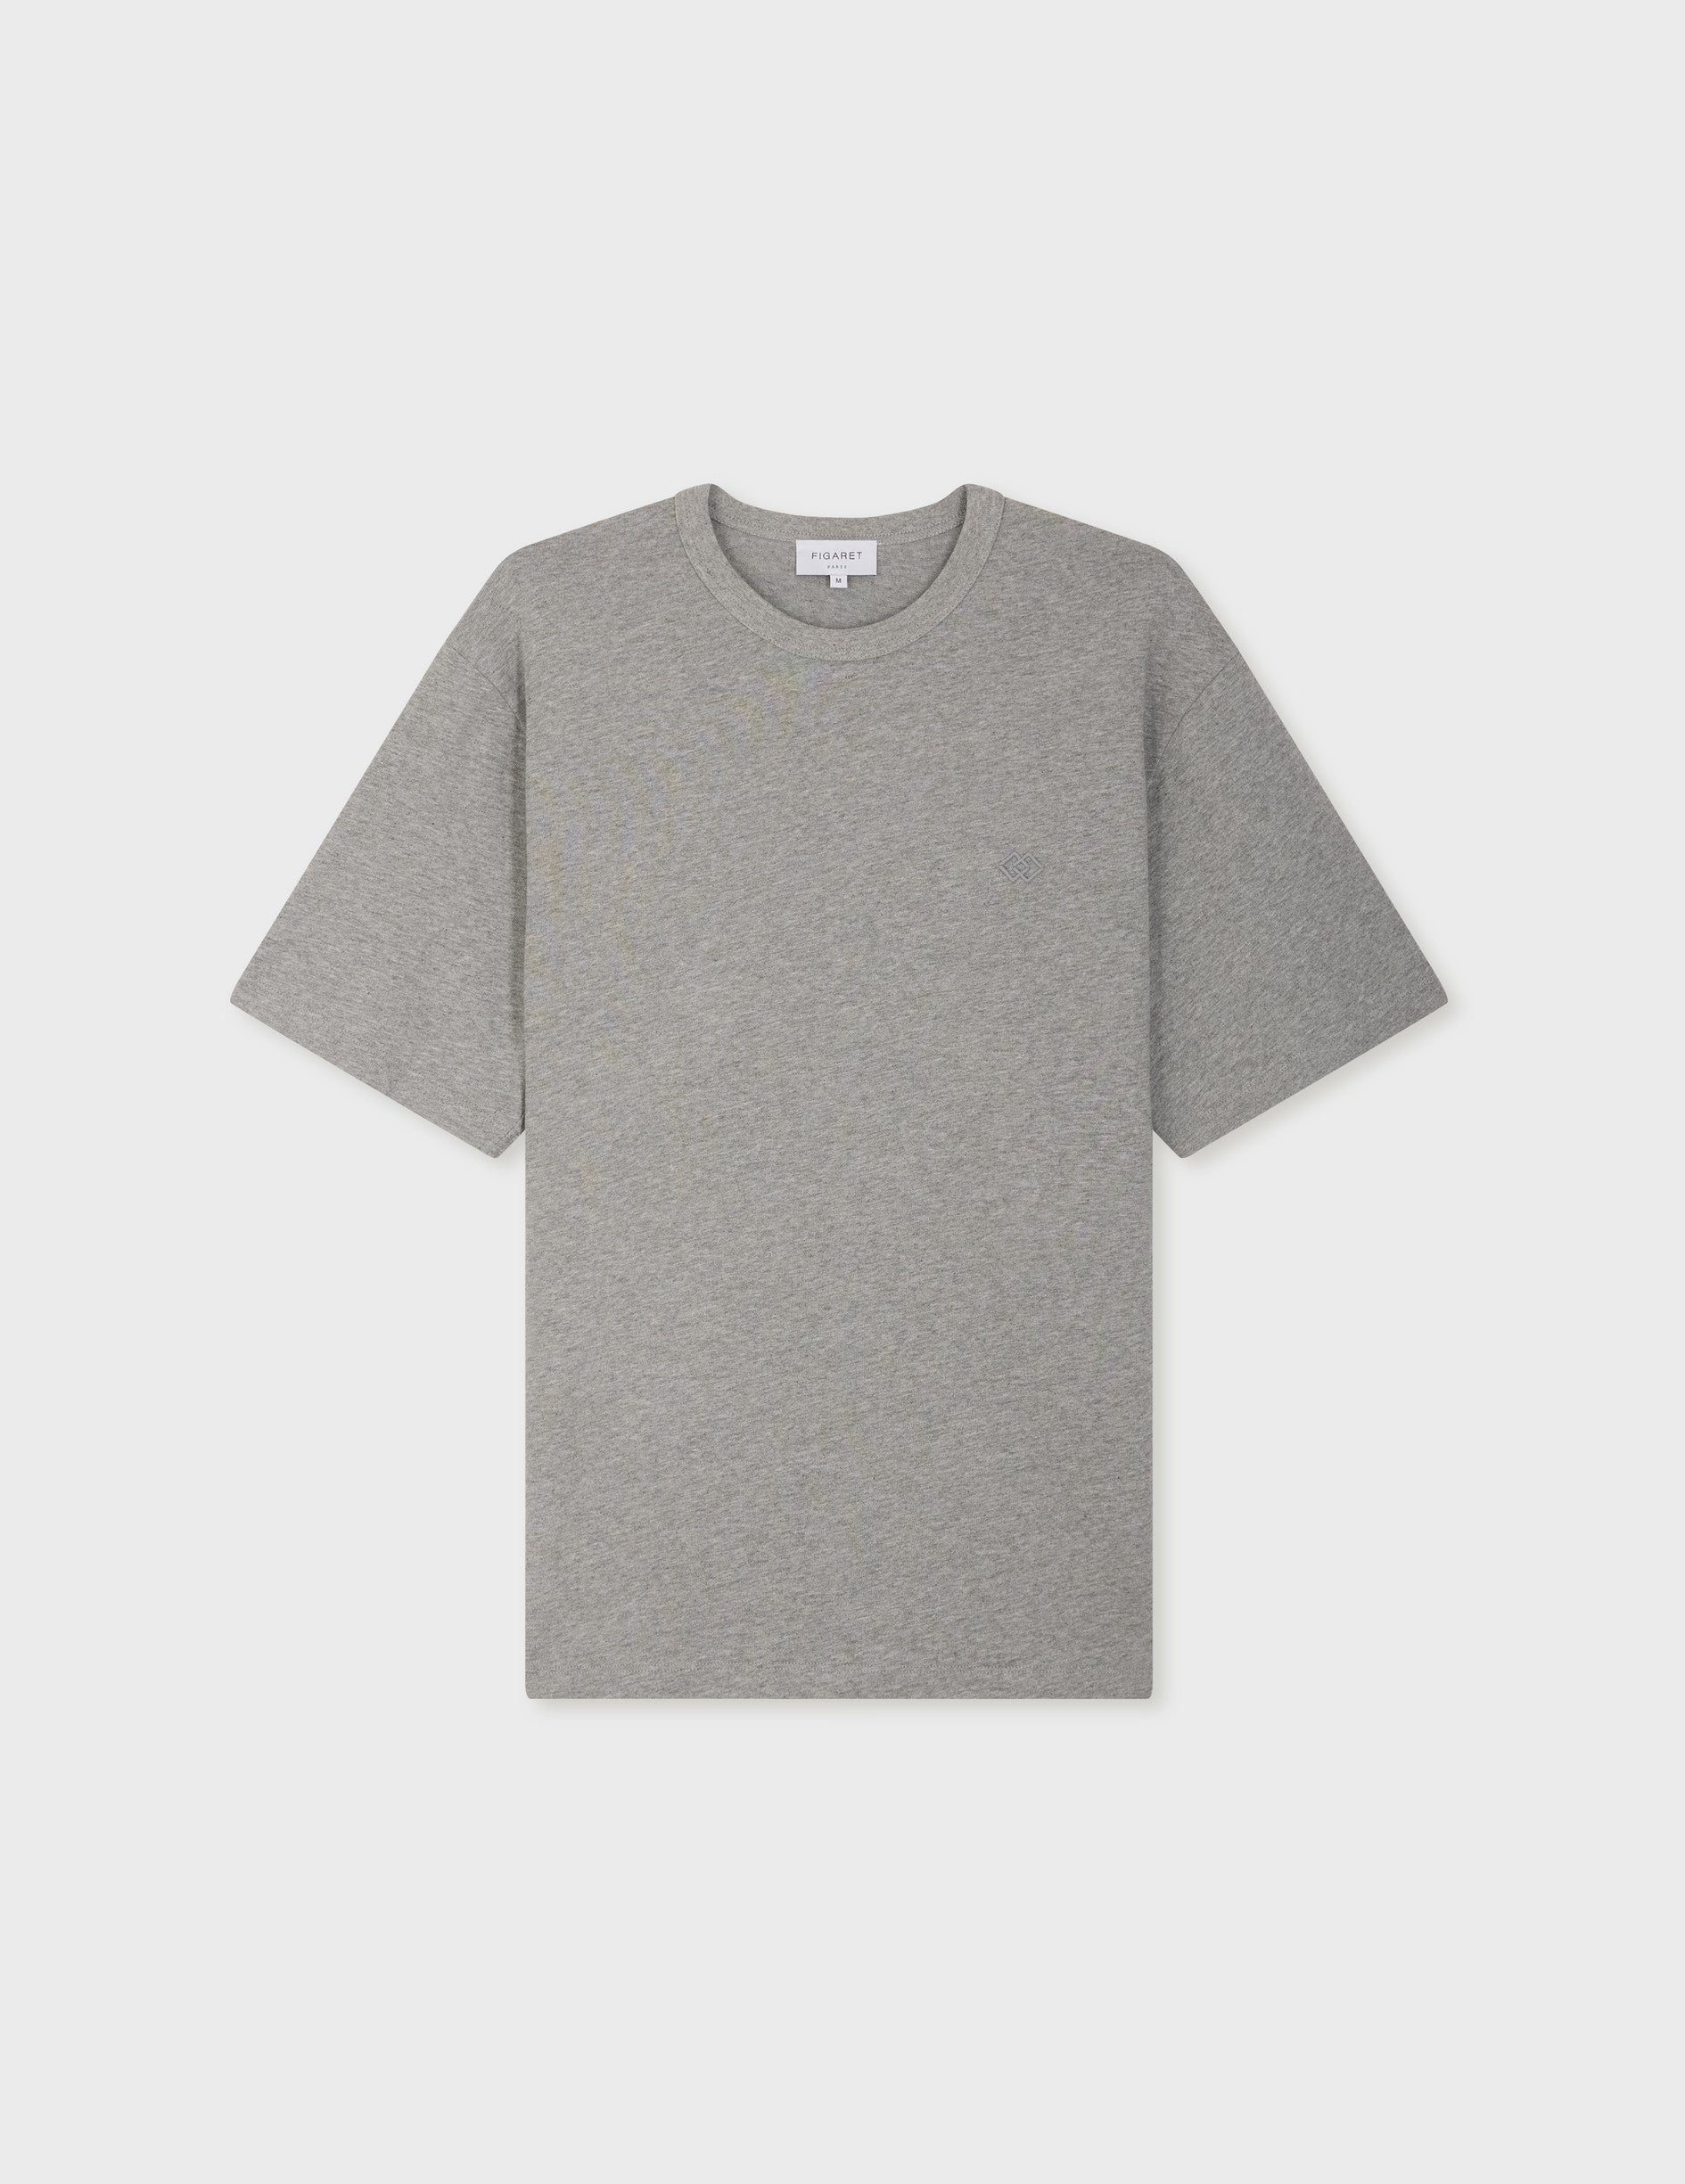 Benny t-shirt in grey jersey